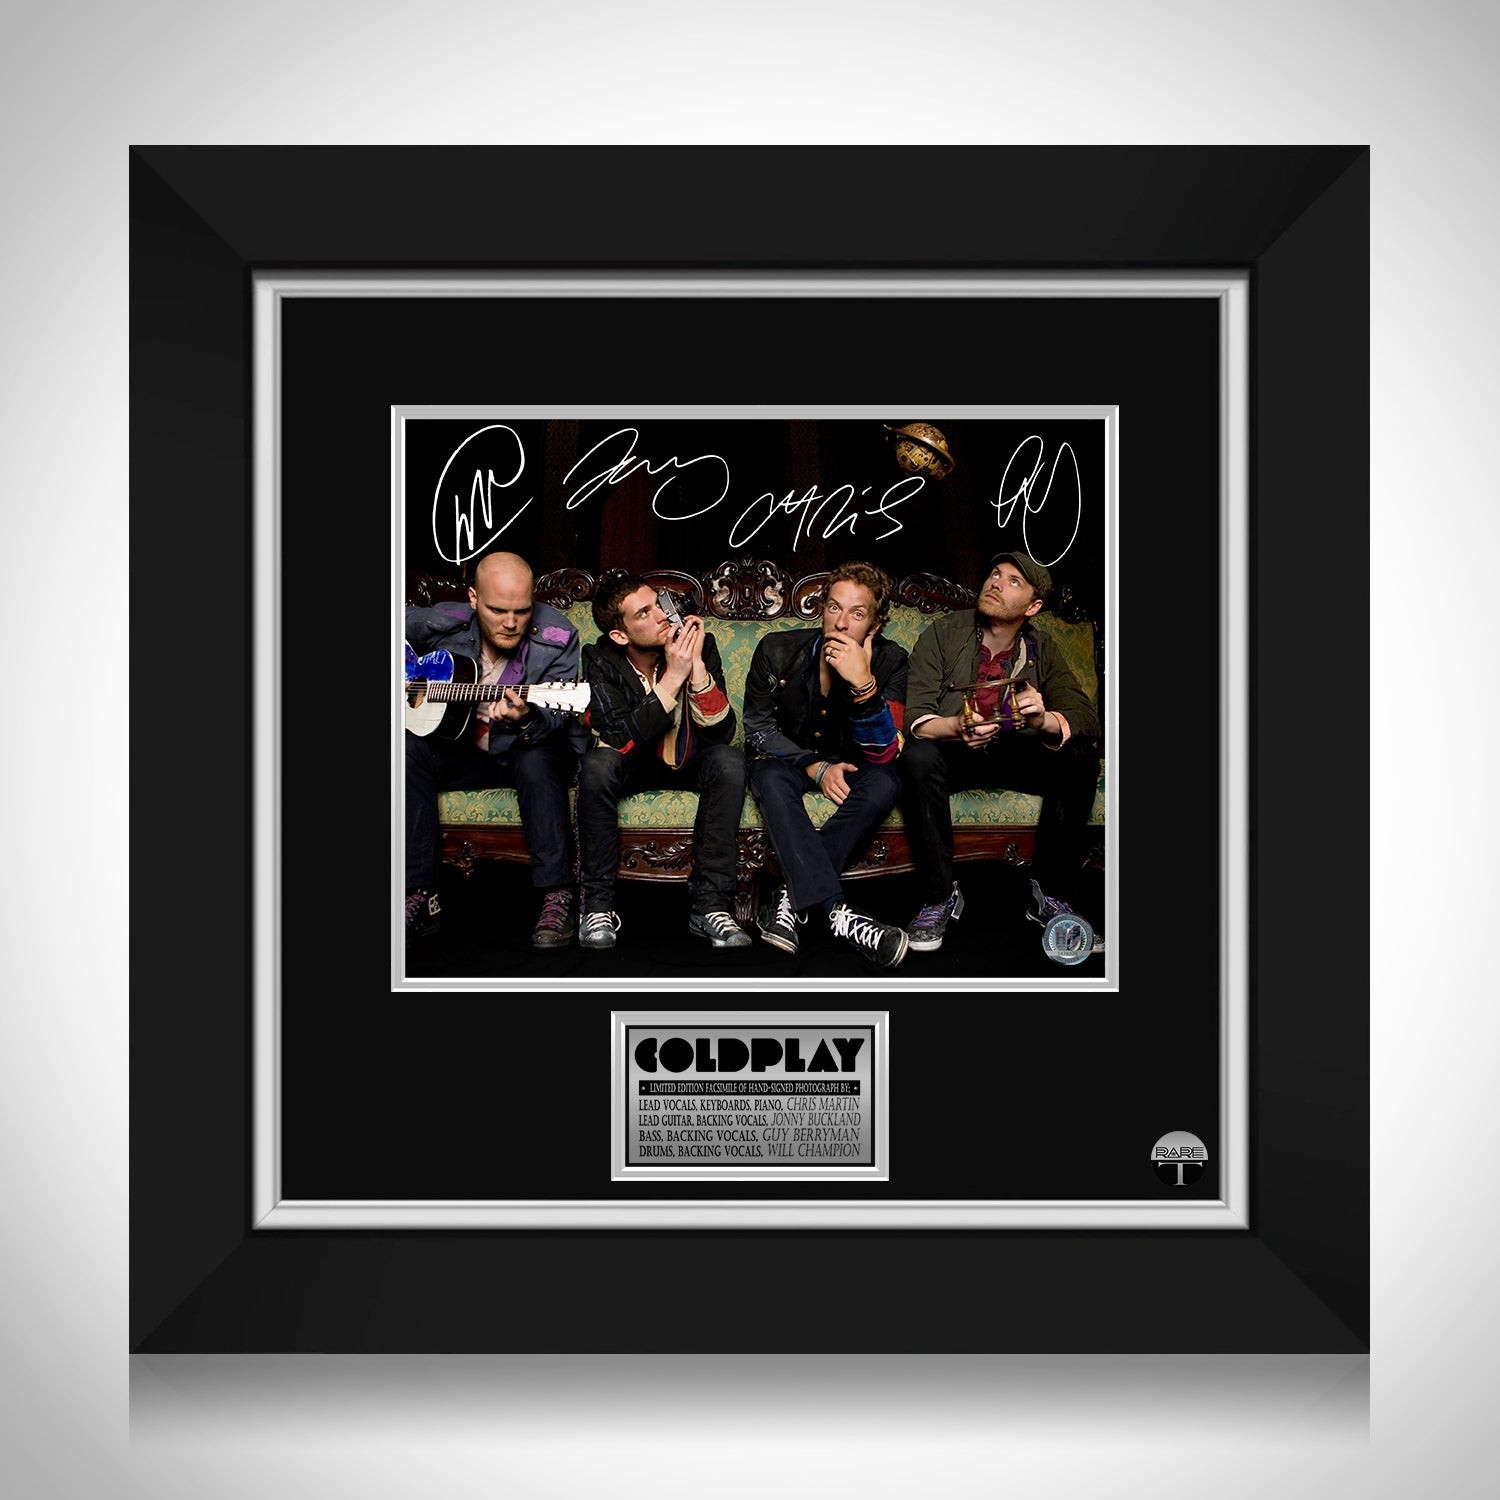 Coldplay A Rush of Blood to the Head, Framed Vinyl Record & Album Cover,  Ready to Hang, Music Gift, Wall Art 